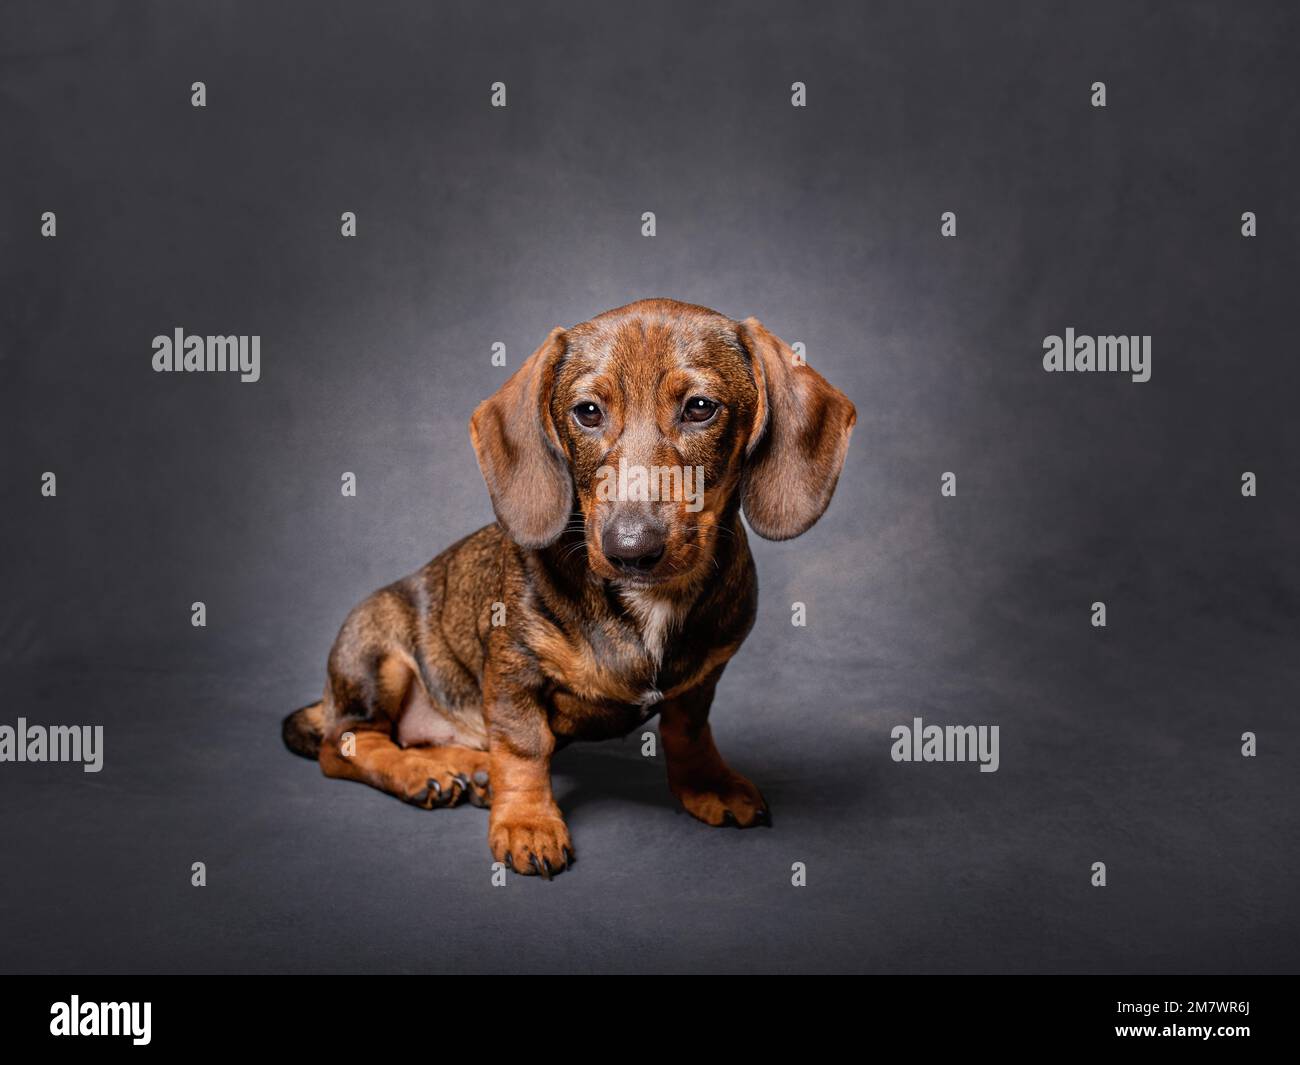 Brown smooth-haired dachshund sitting in a studio. Stock Photo